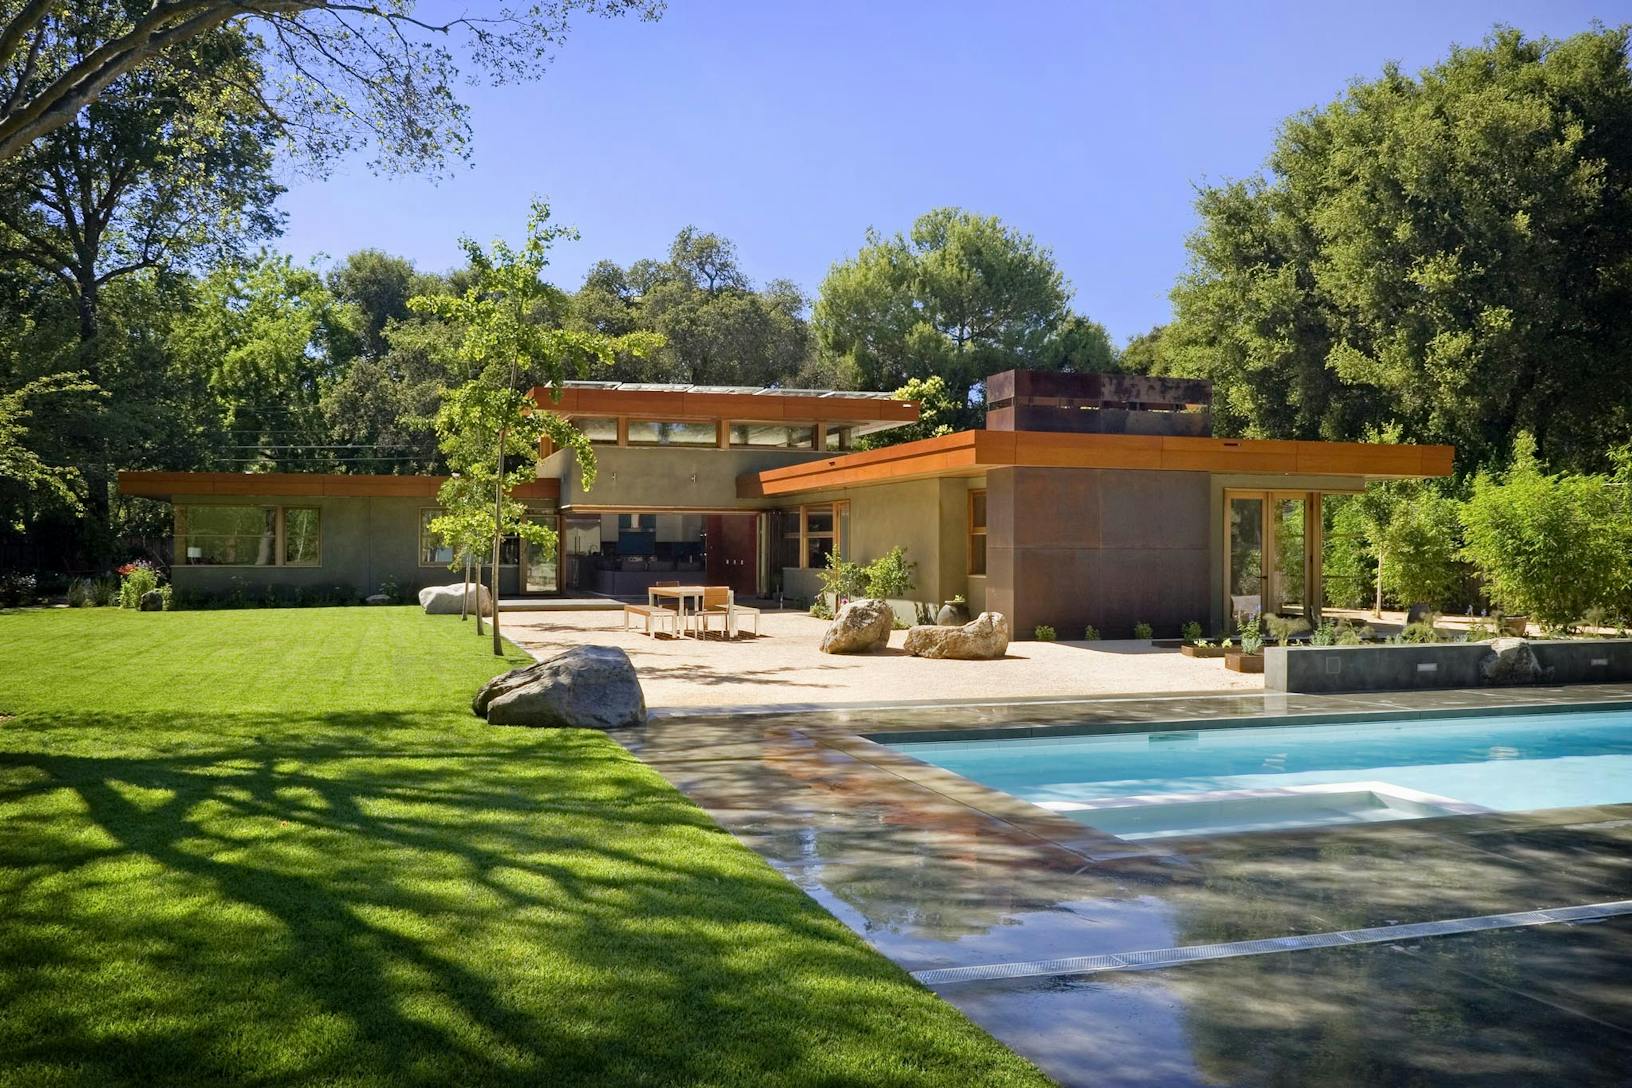 WD65 Residence with a pool and trees _ wood framed glass walls